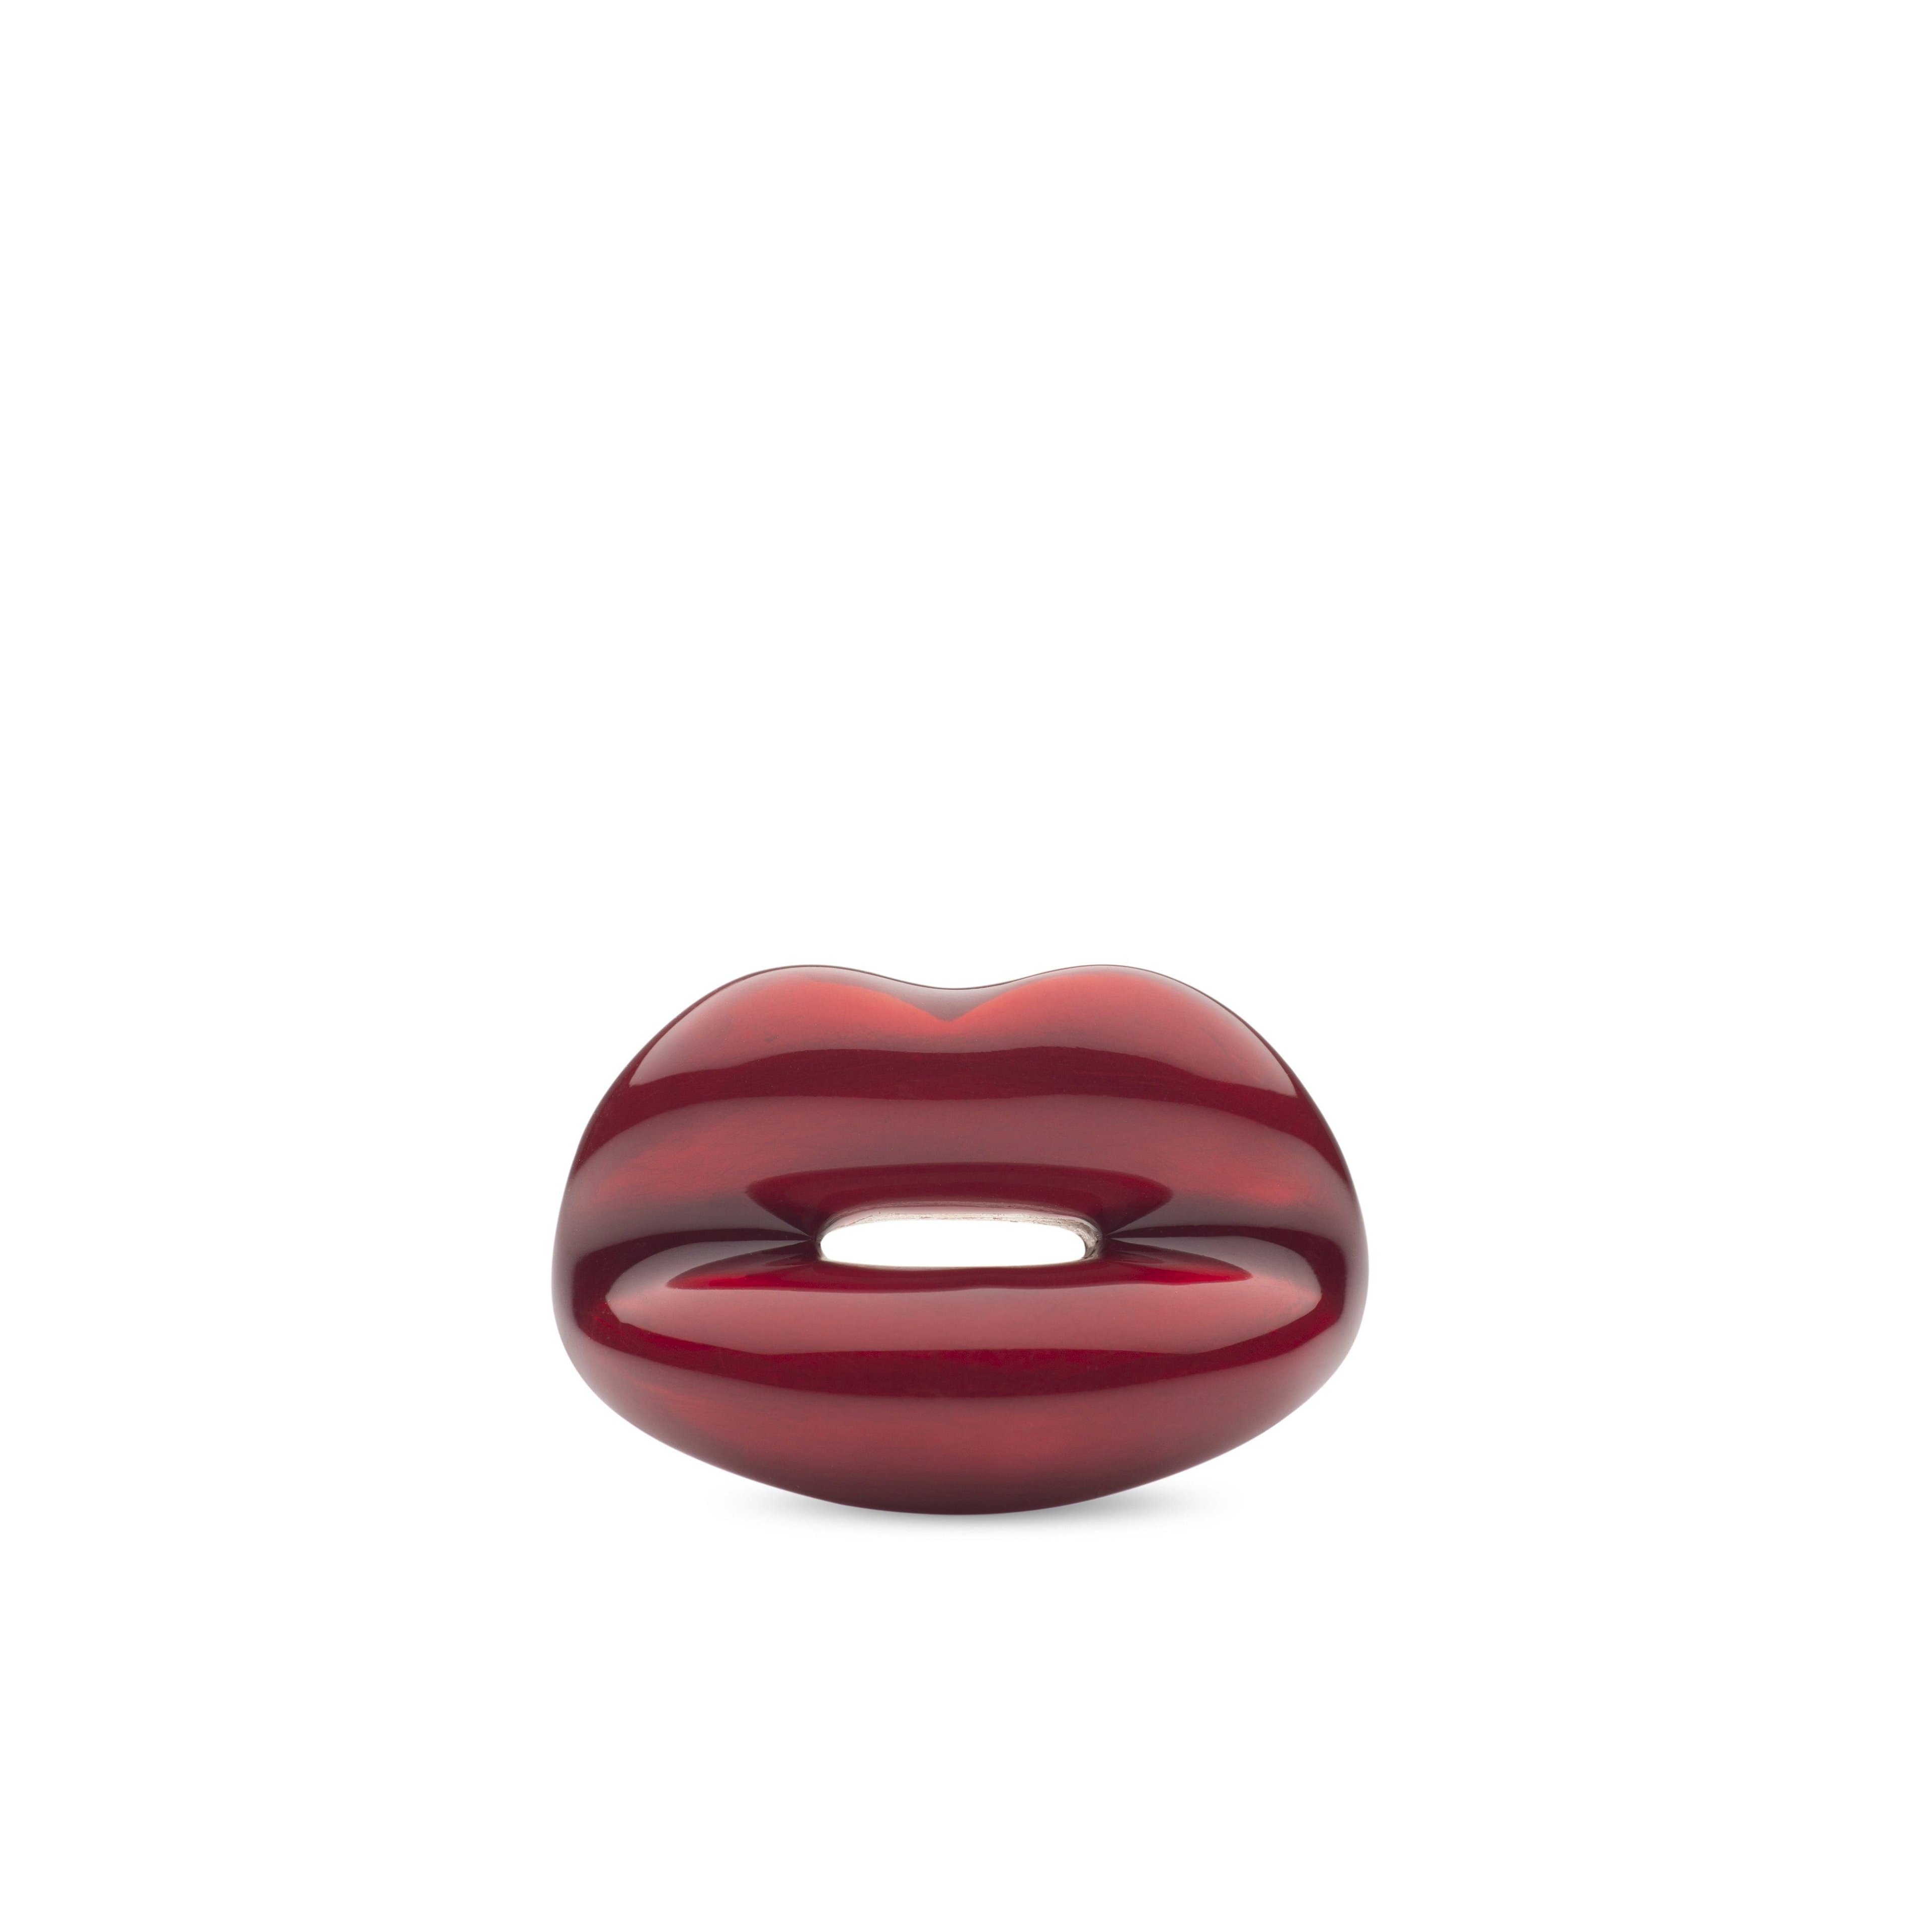 Solange - Hotlips Ring - (Juicy Red) by SOLANGE LTD